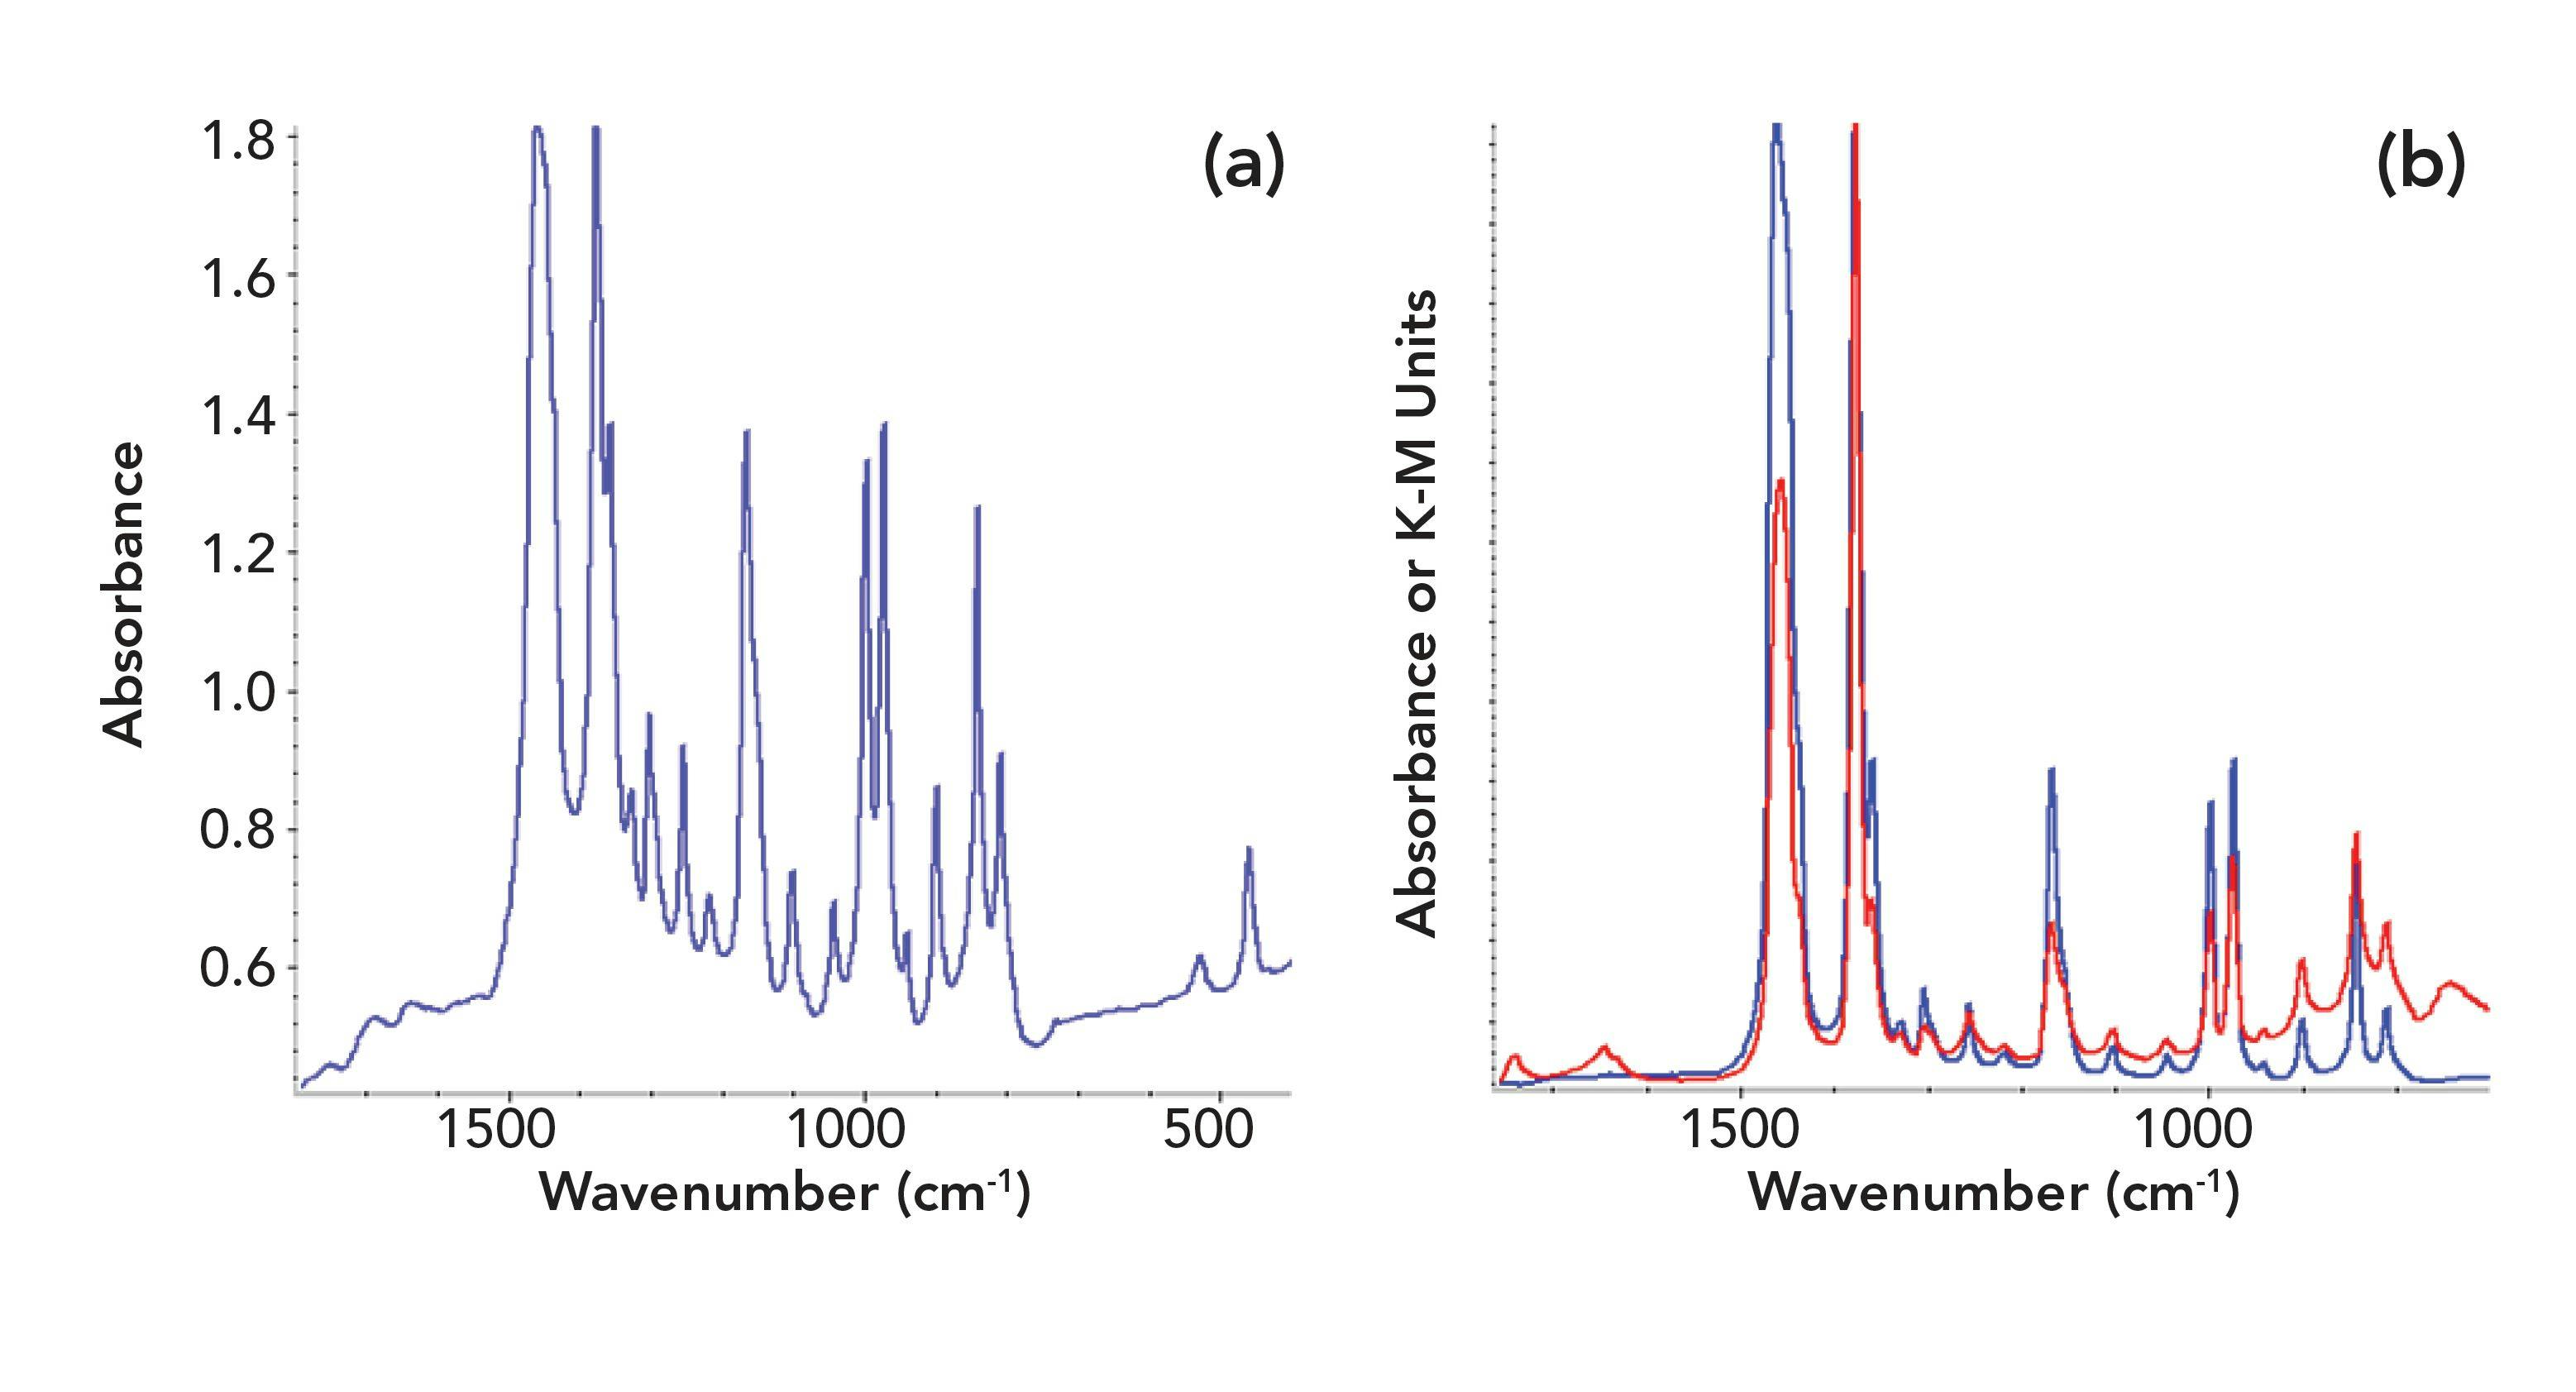 Figure 2: Mid-infrared spectra of a three-ply face mask collected via (a) diffuse reflection, (b) diffuse reflection after the Kubelka-Munk conversion (blue) and ATR (red).